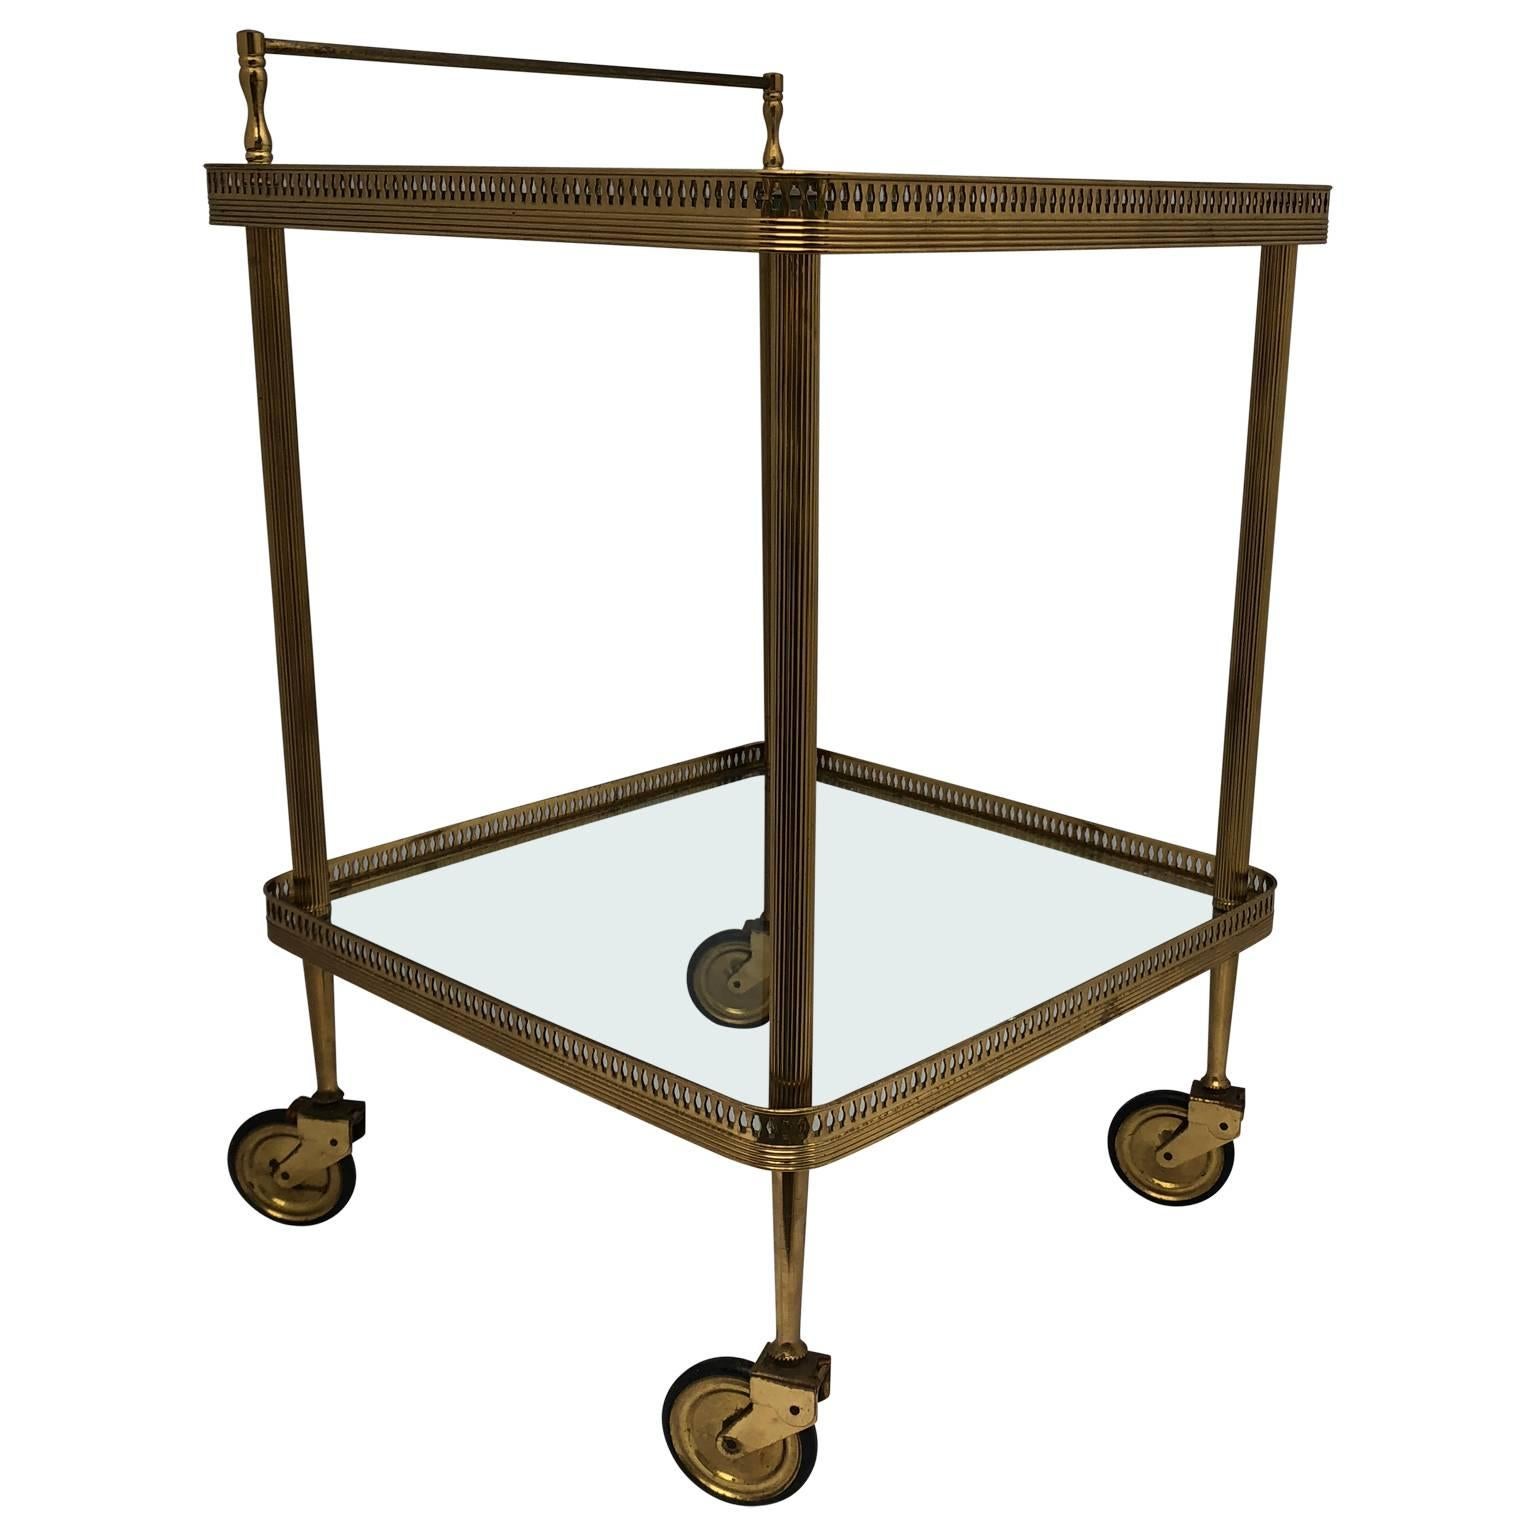 Italian Mid-Century Modern square brass bar cart
Two-tier.
$125 flat rate front door delivery includes Washington DC metro, Baltimore and Philadelphia